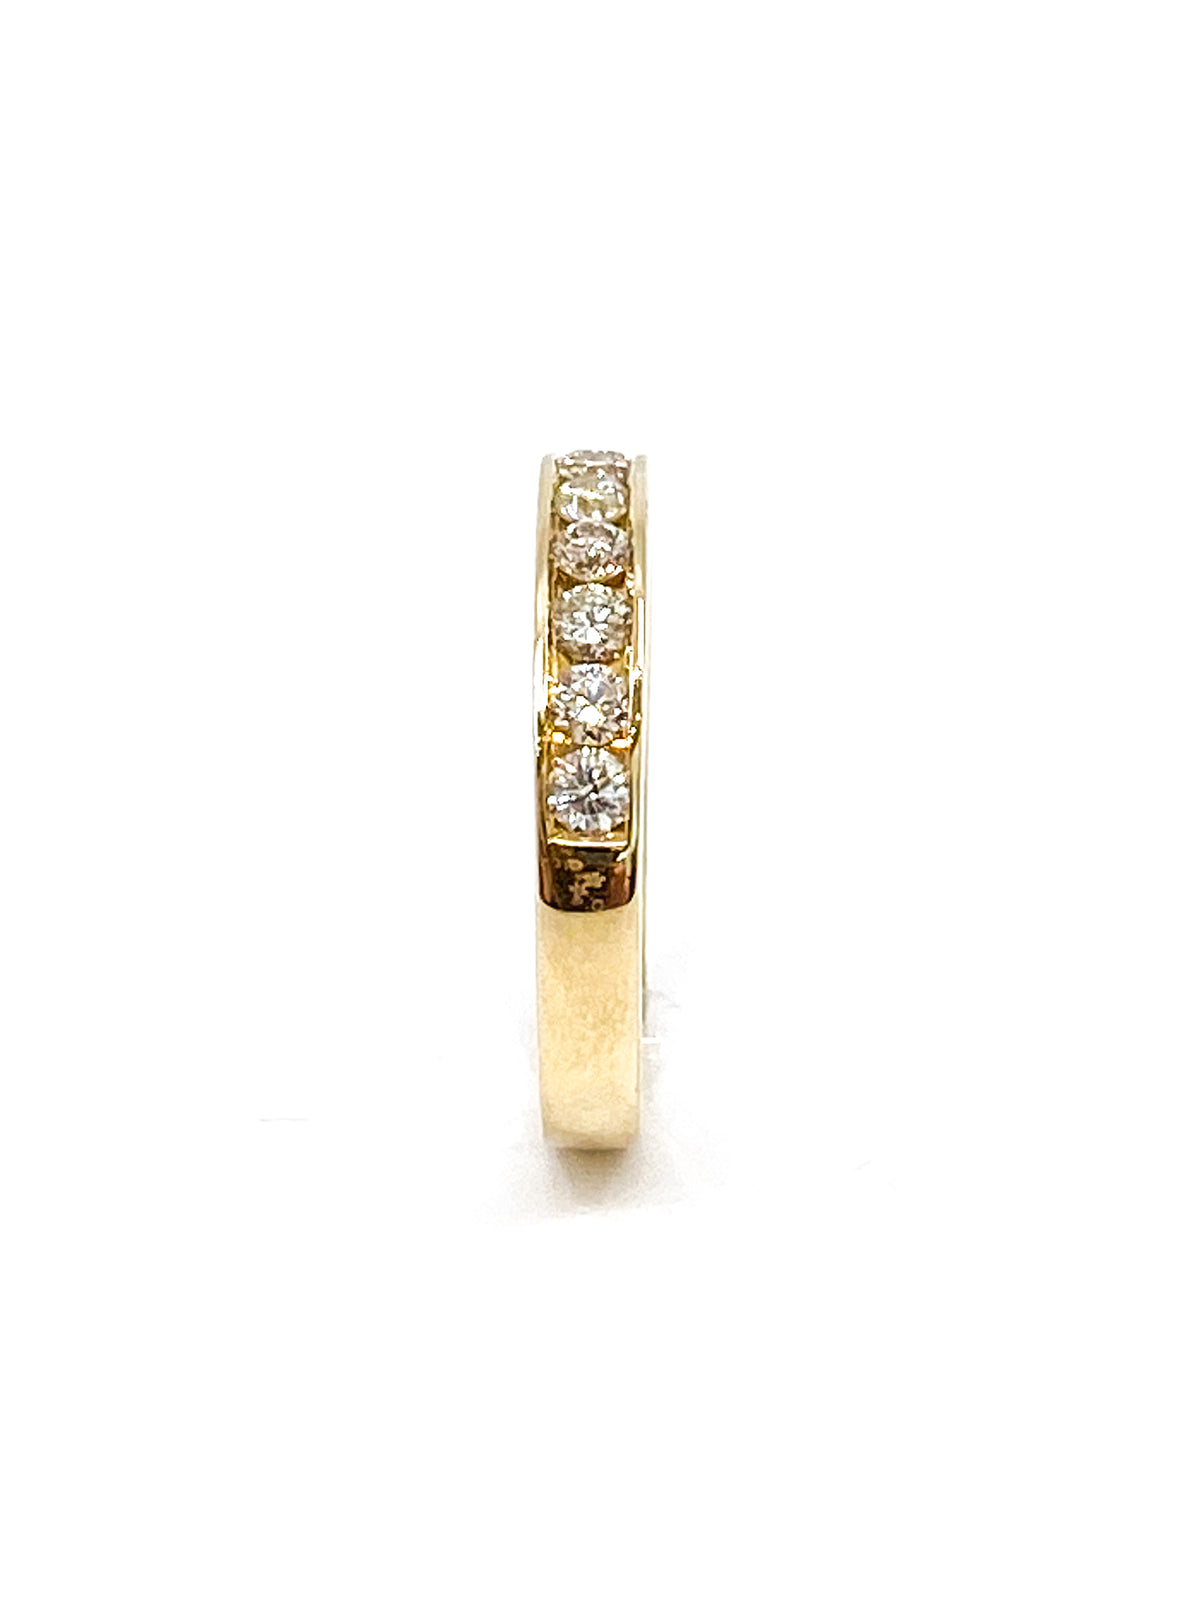 14K Yellow Gold 0.50cttw Diamond Anniversary Channel Set Ring / Band, size 6.5